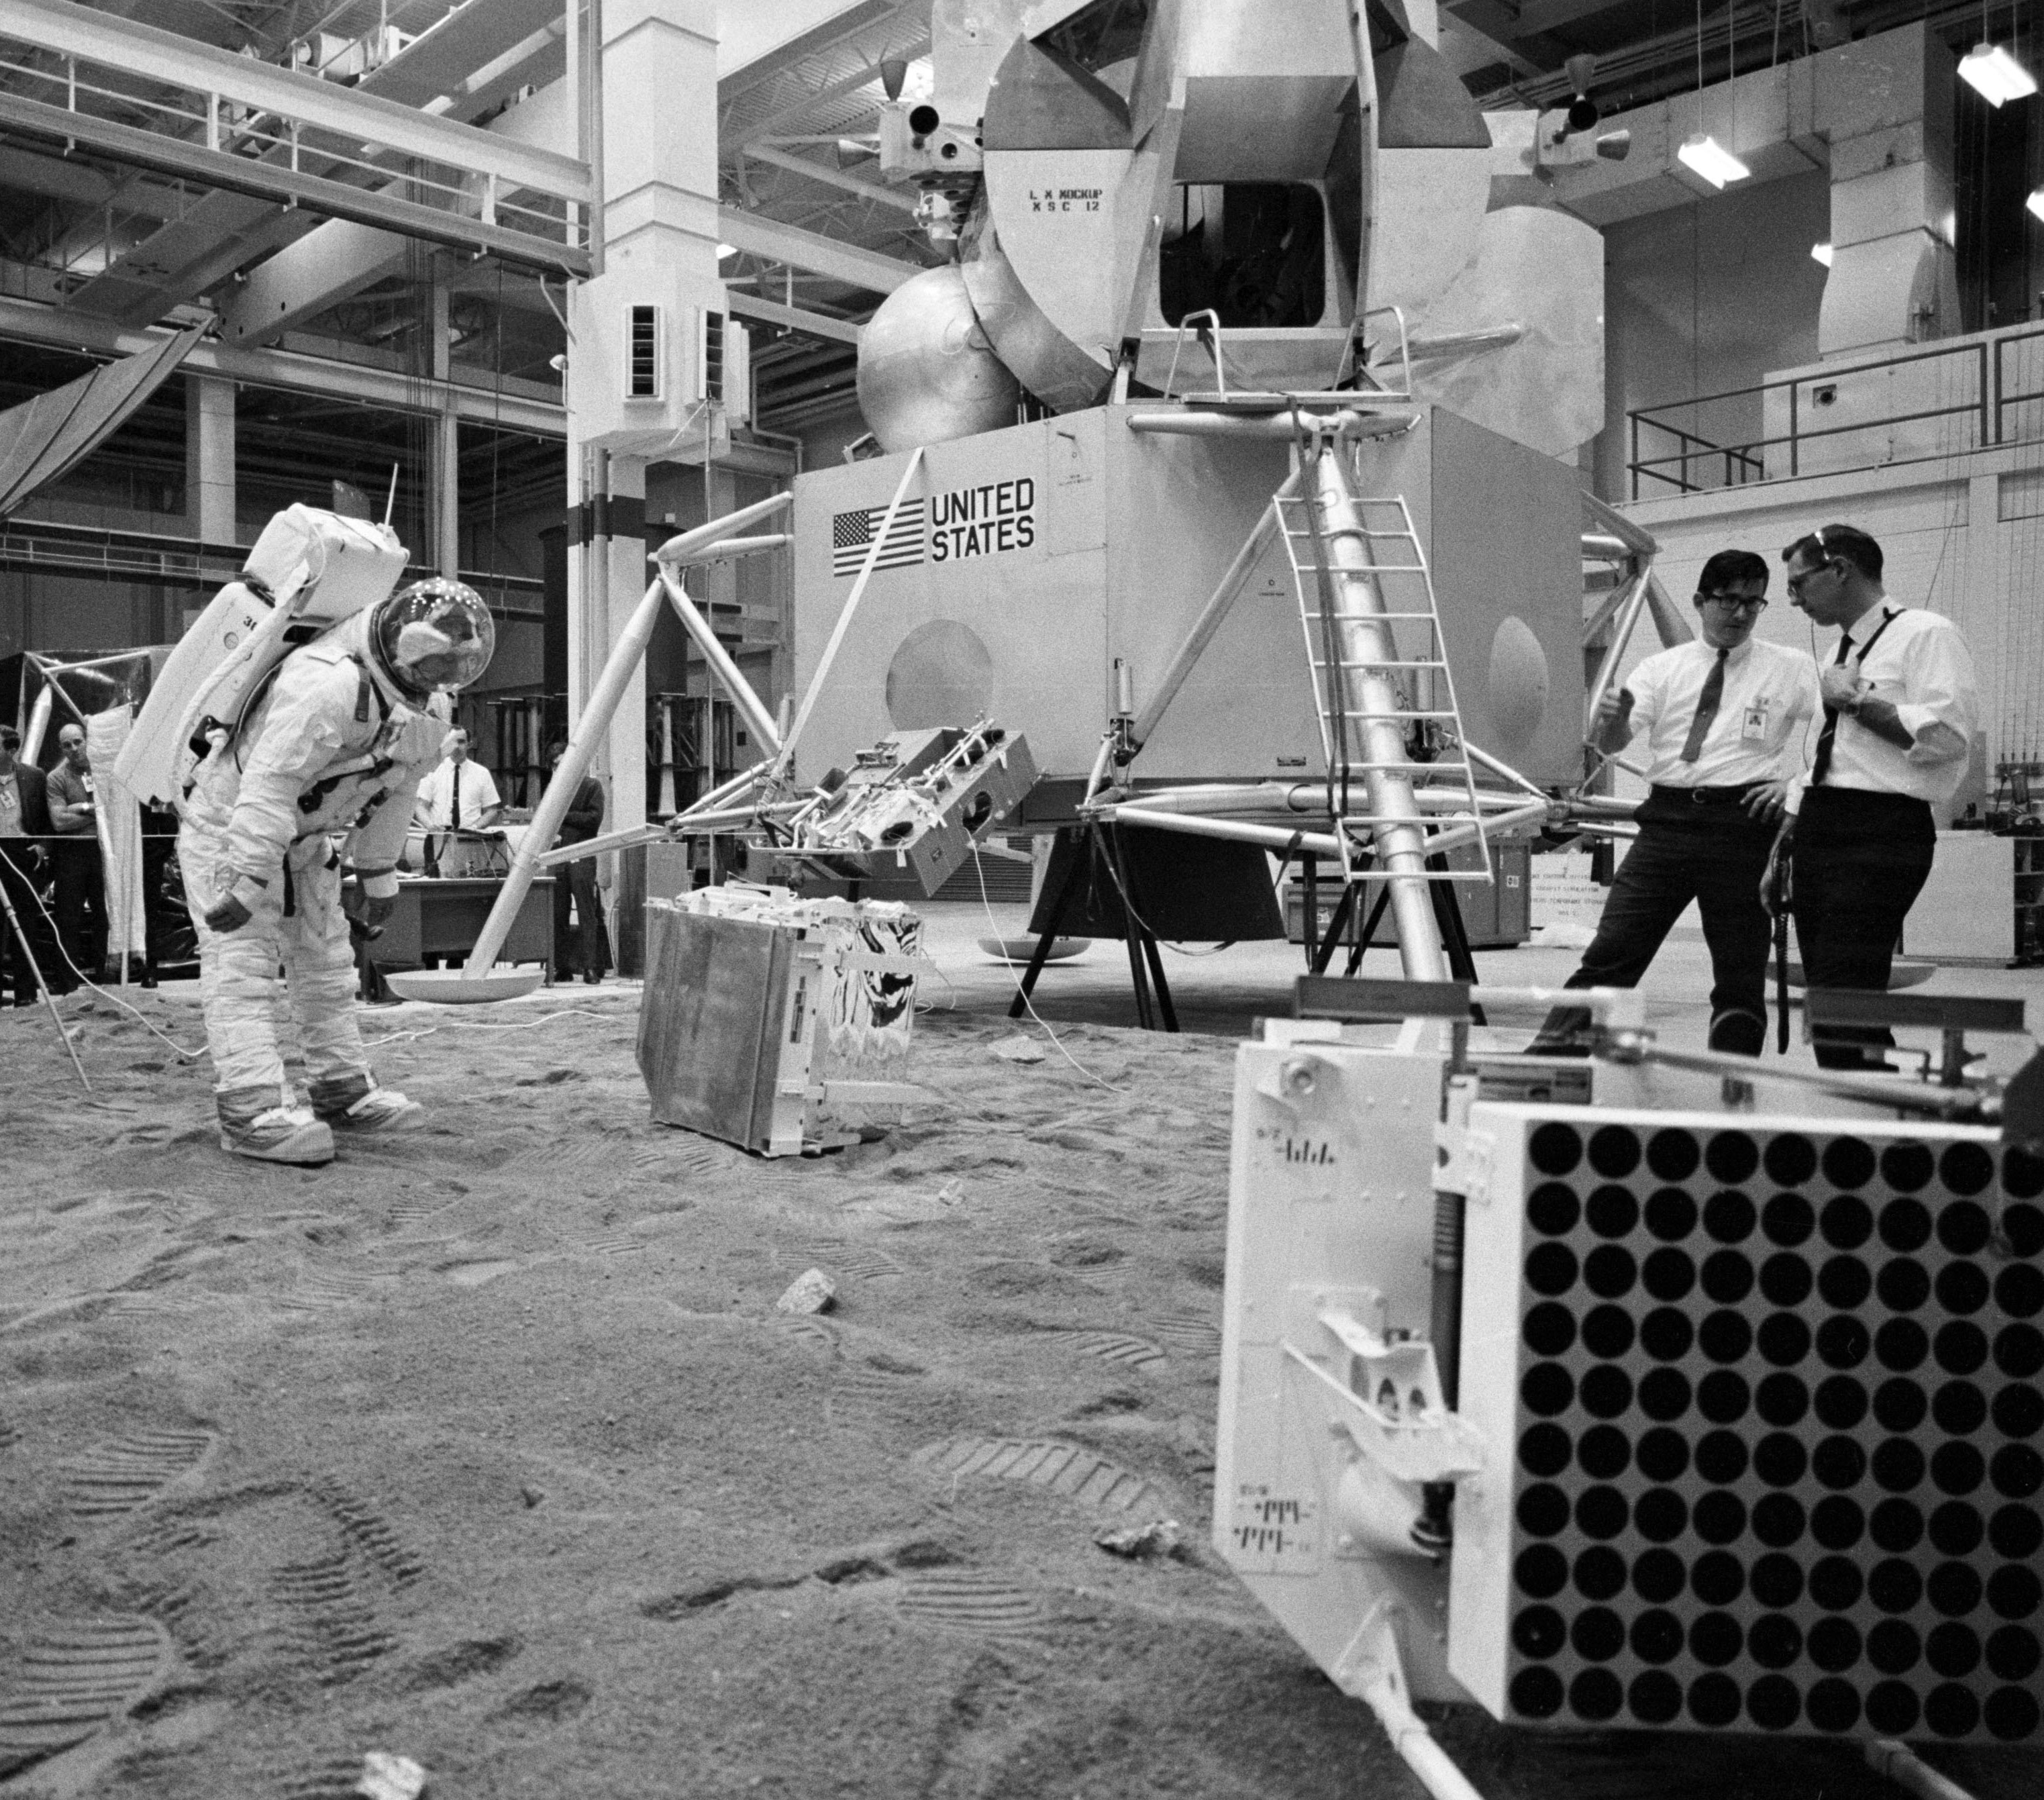 A suited technician deploys mockups of the Apollo 11 experiments – the SWC, far left, the PSEP, and the LRRR, during a test session